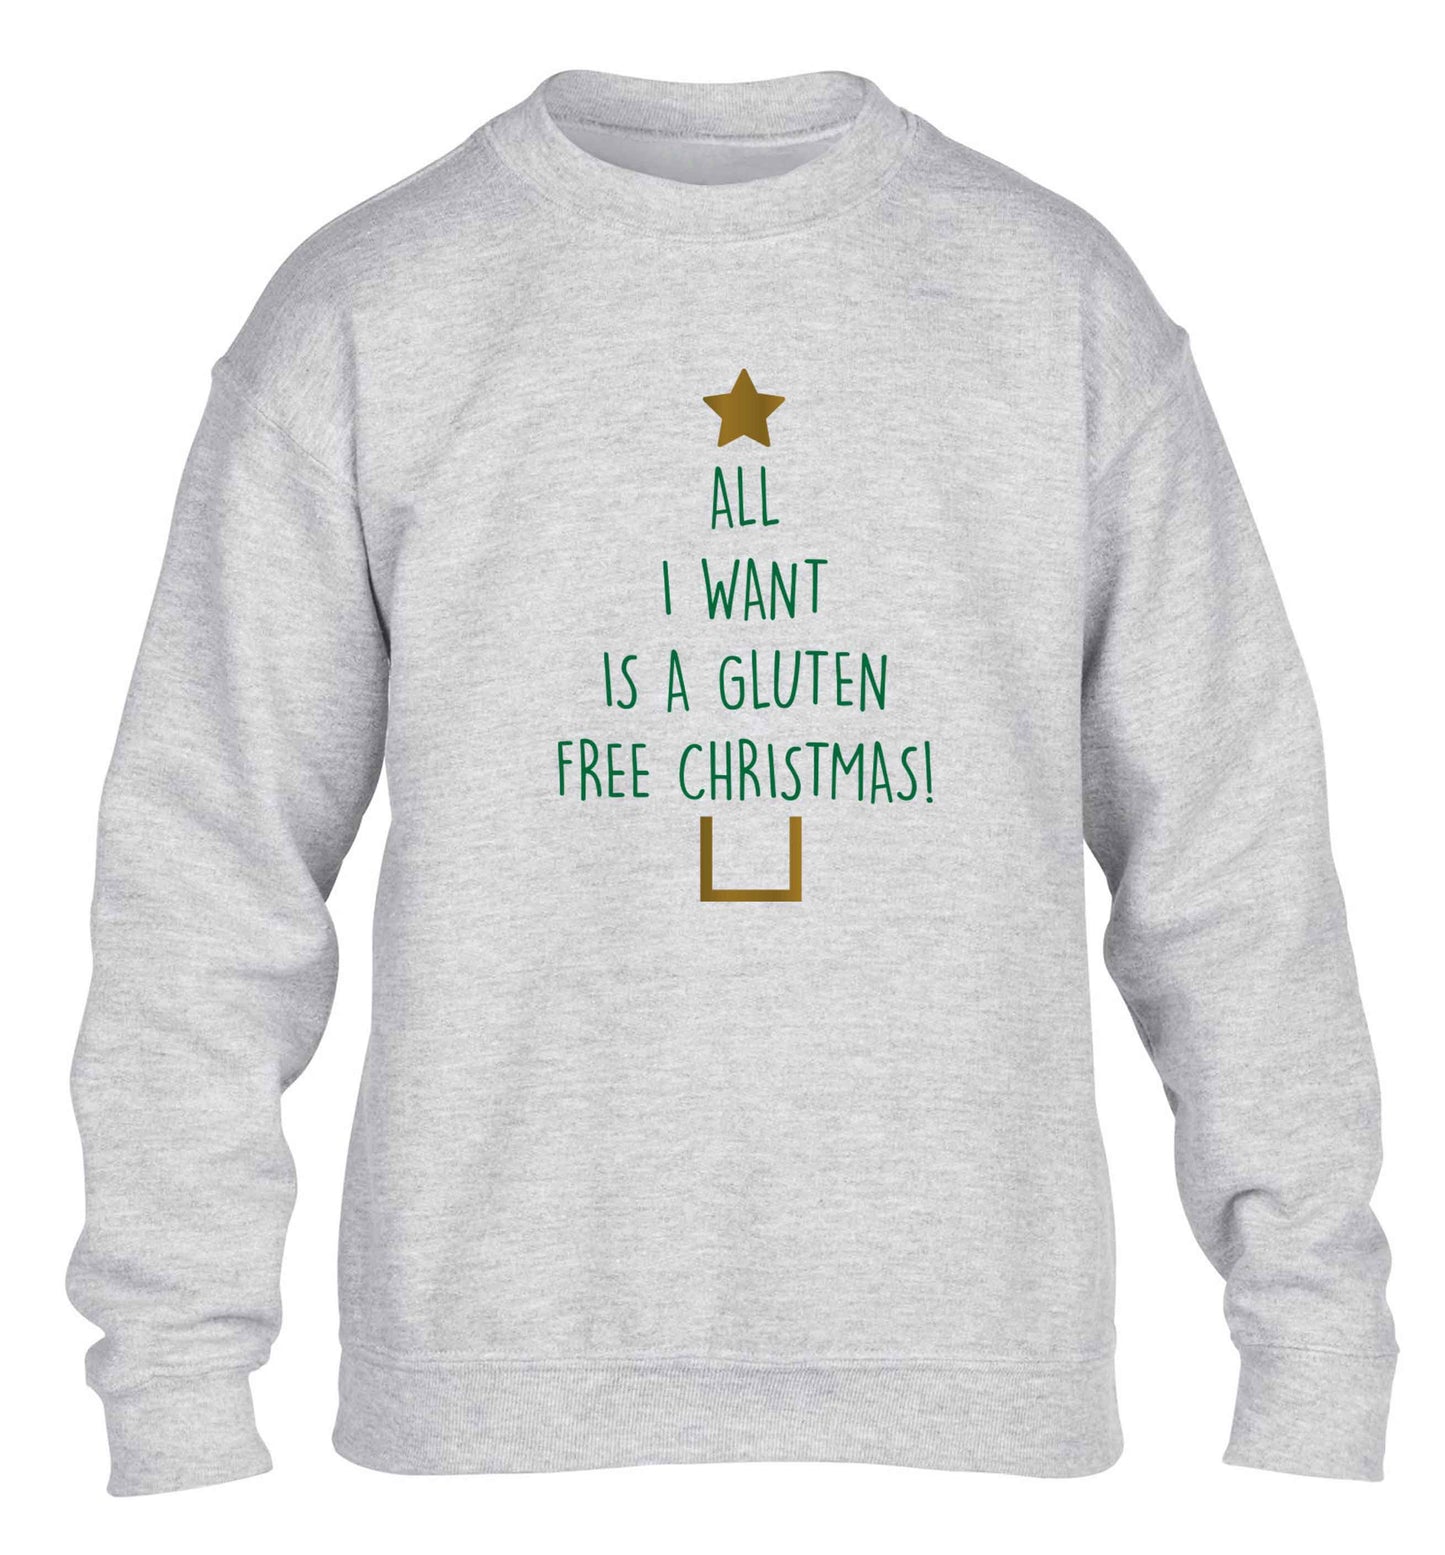 All I want is a gluten free Christmas children's grey sweater 12-13 Years